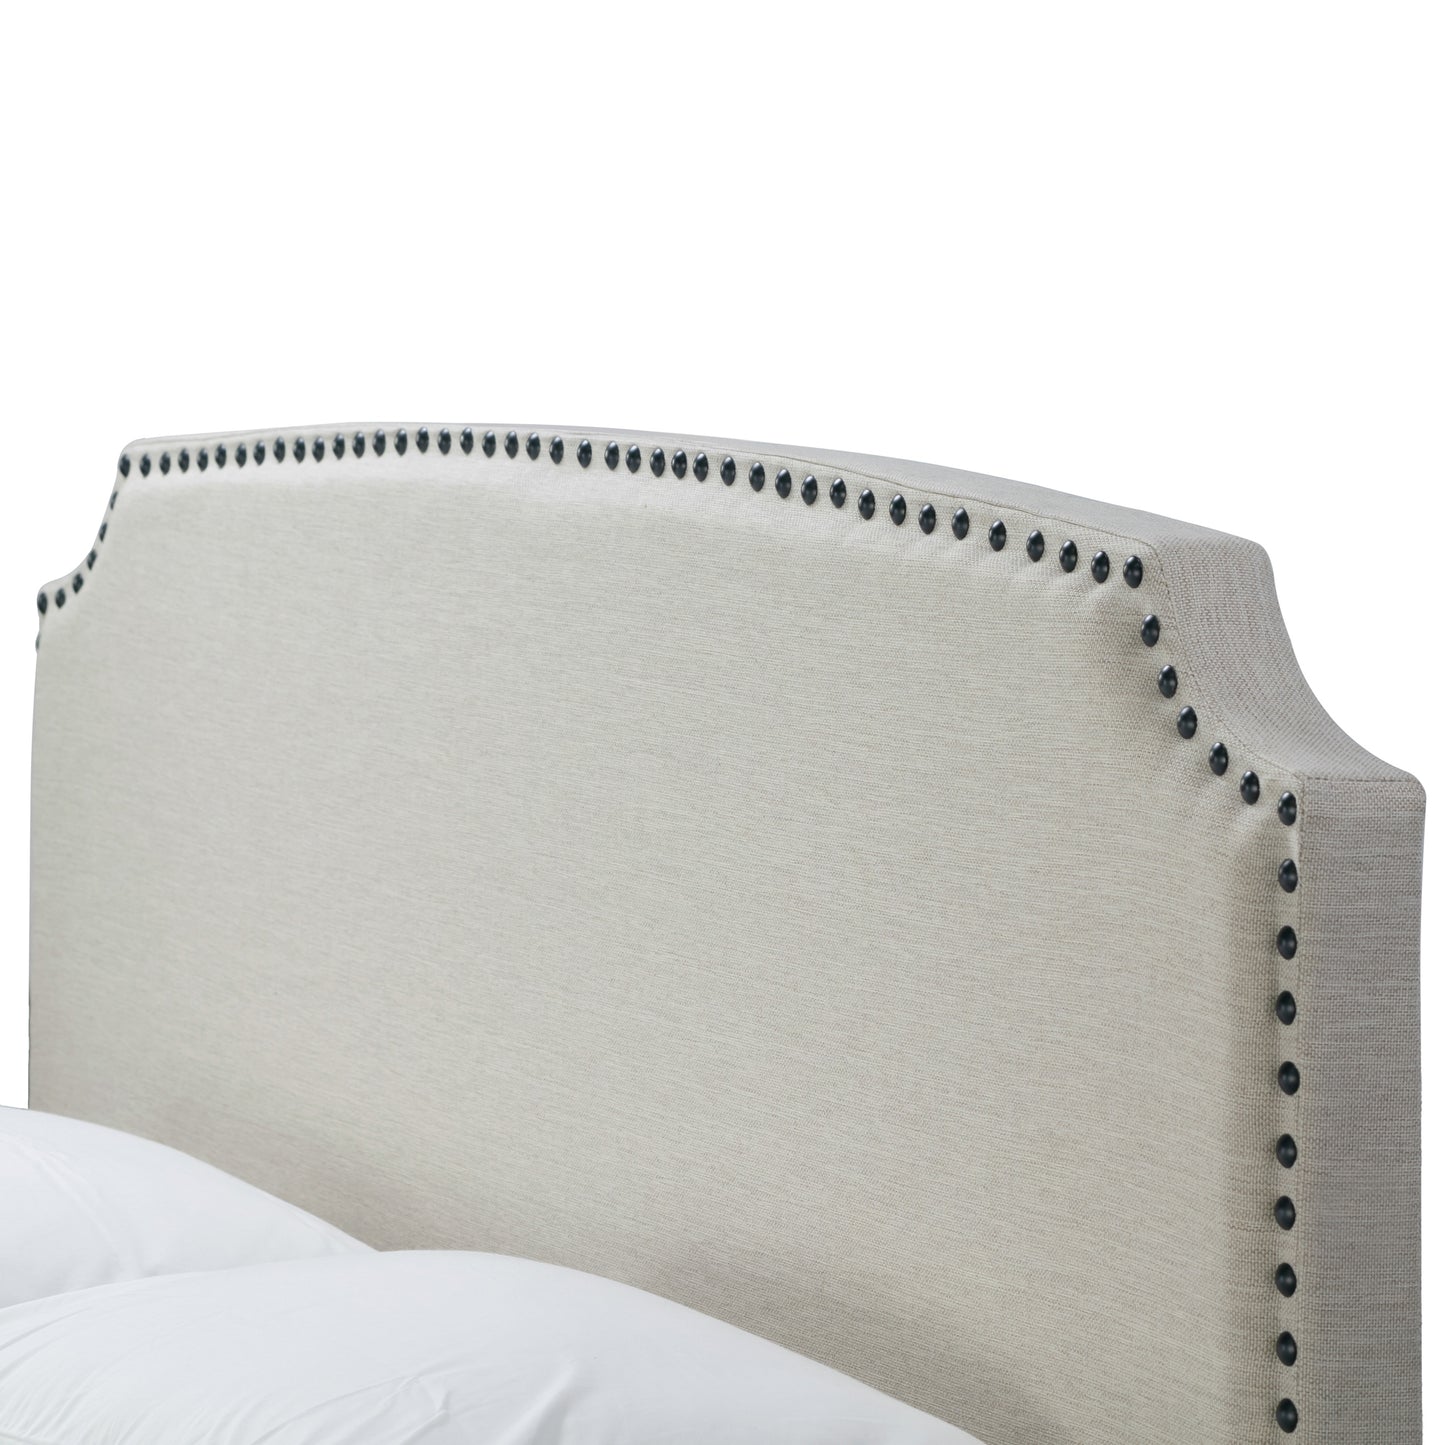 Arezo Beige Fabric Queen Bed with Black Nail Head Trim